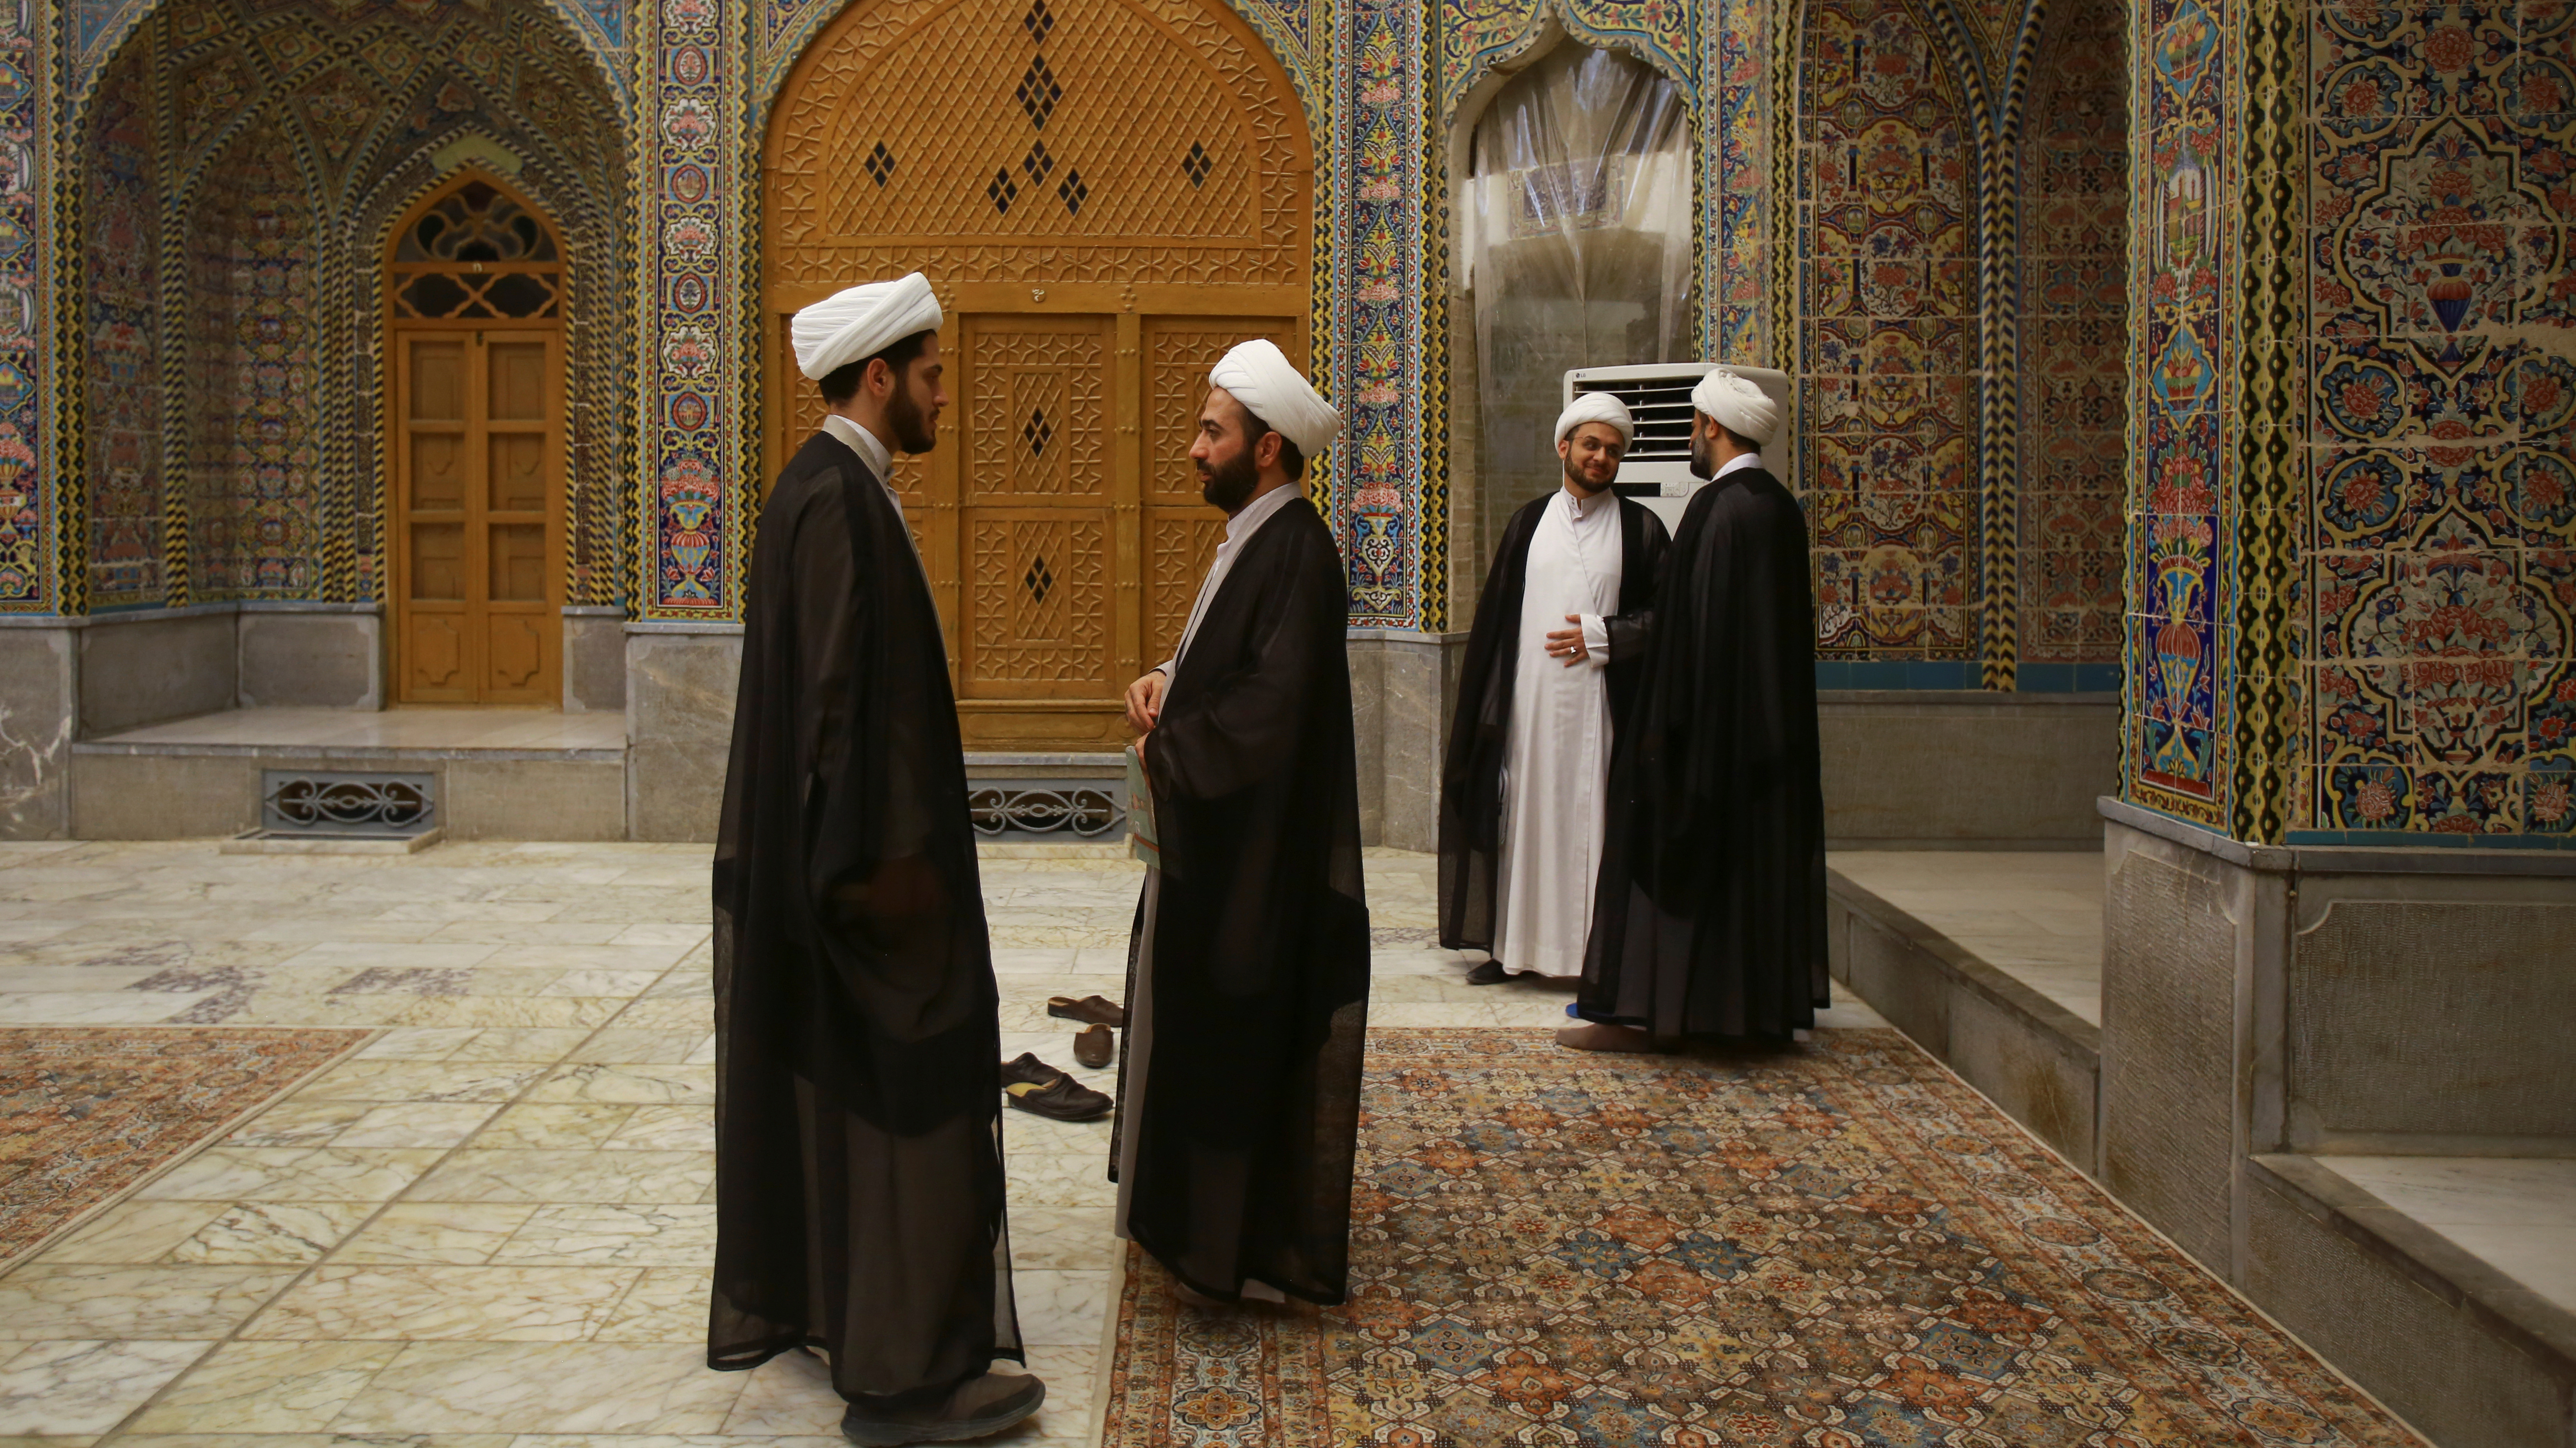 The Wider Image: A look inside the "heart of society" for Iraq's Shi'ites